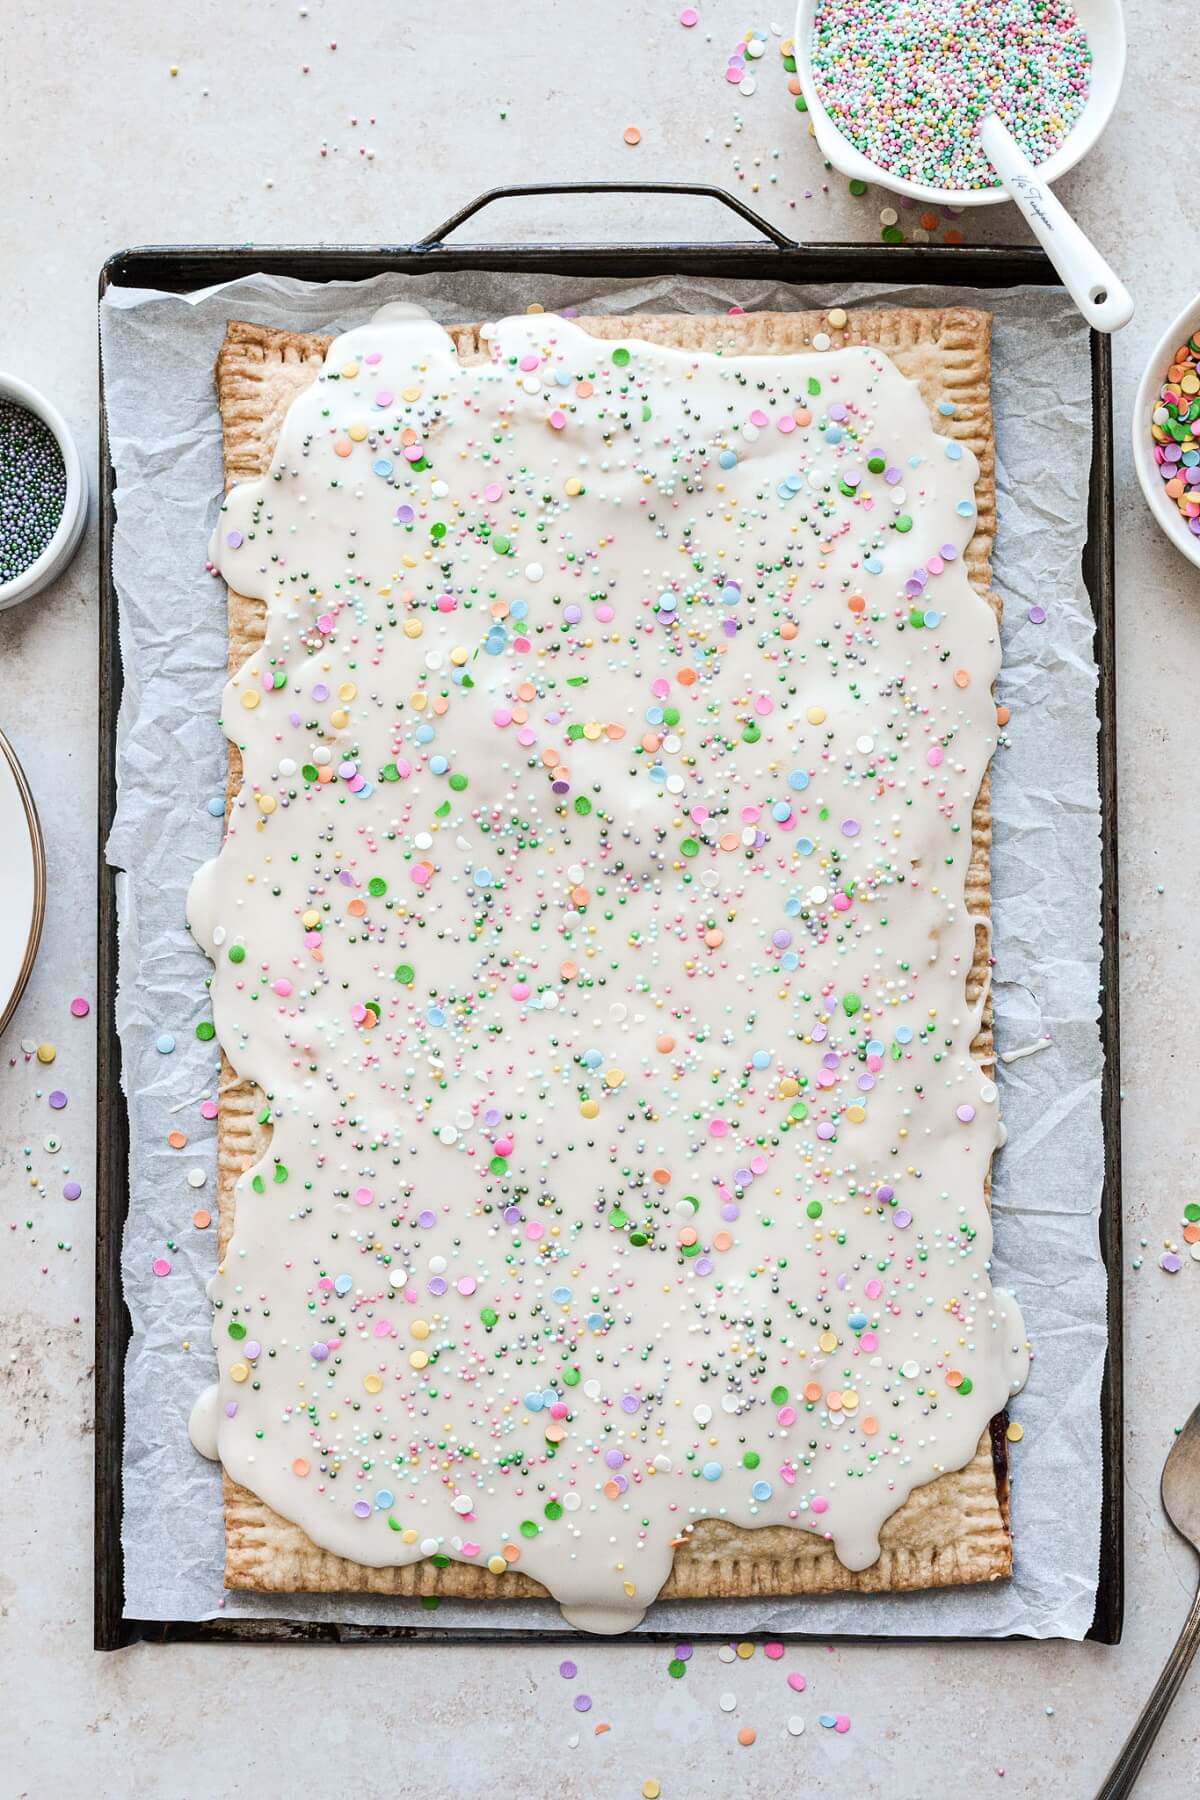 A big blueberry pop tart on a baking sheet with vanilla icing and sprinkles.